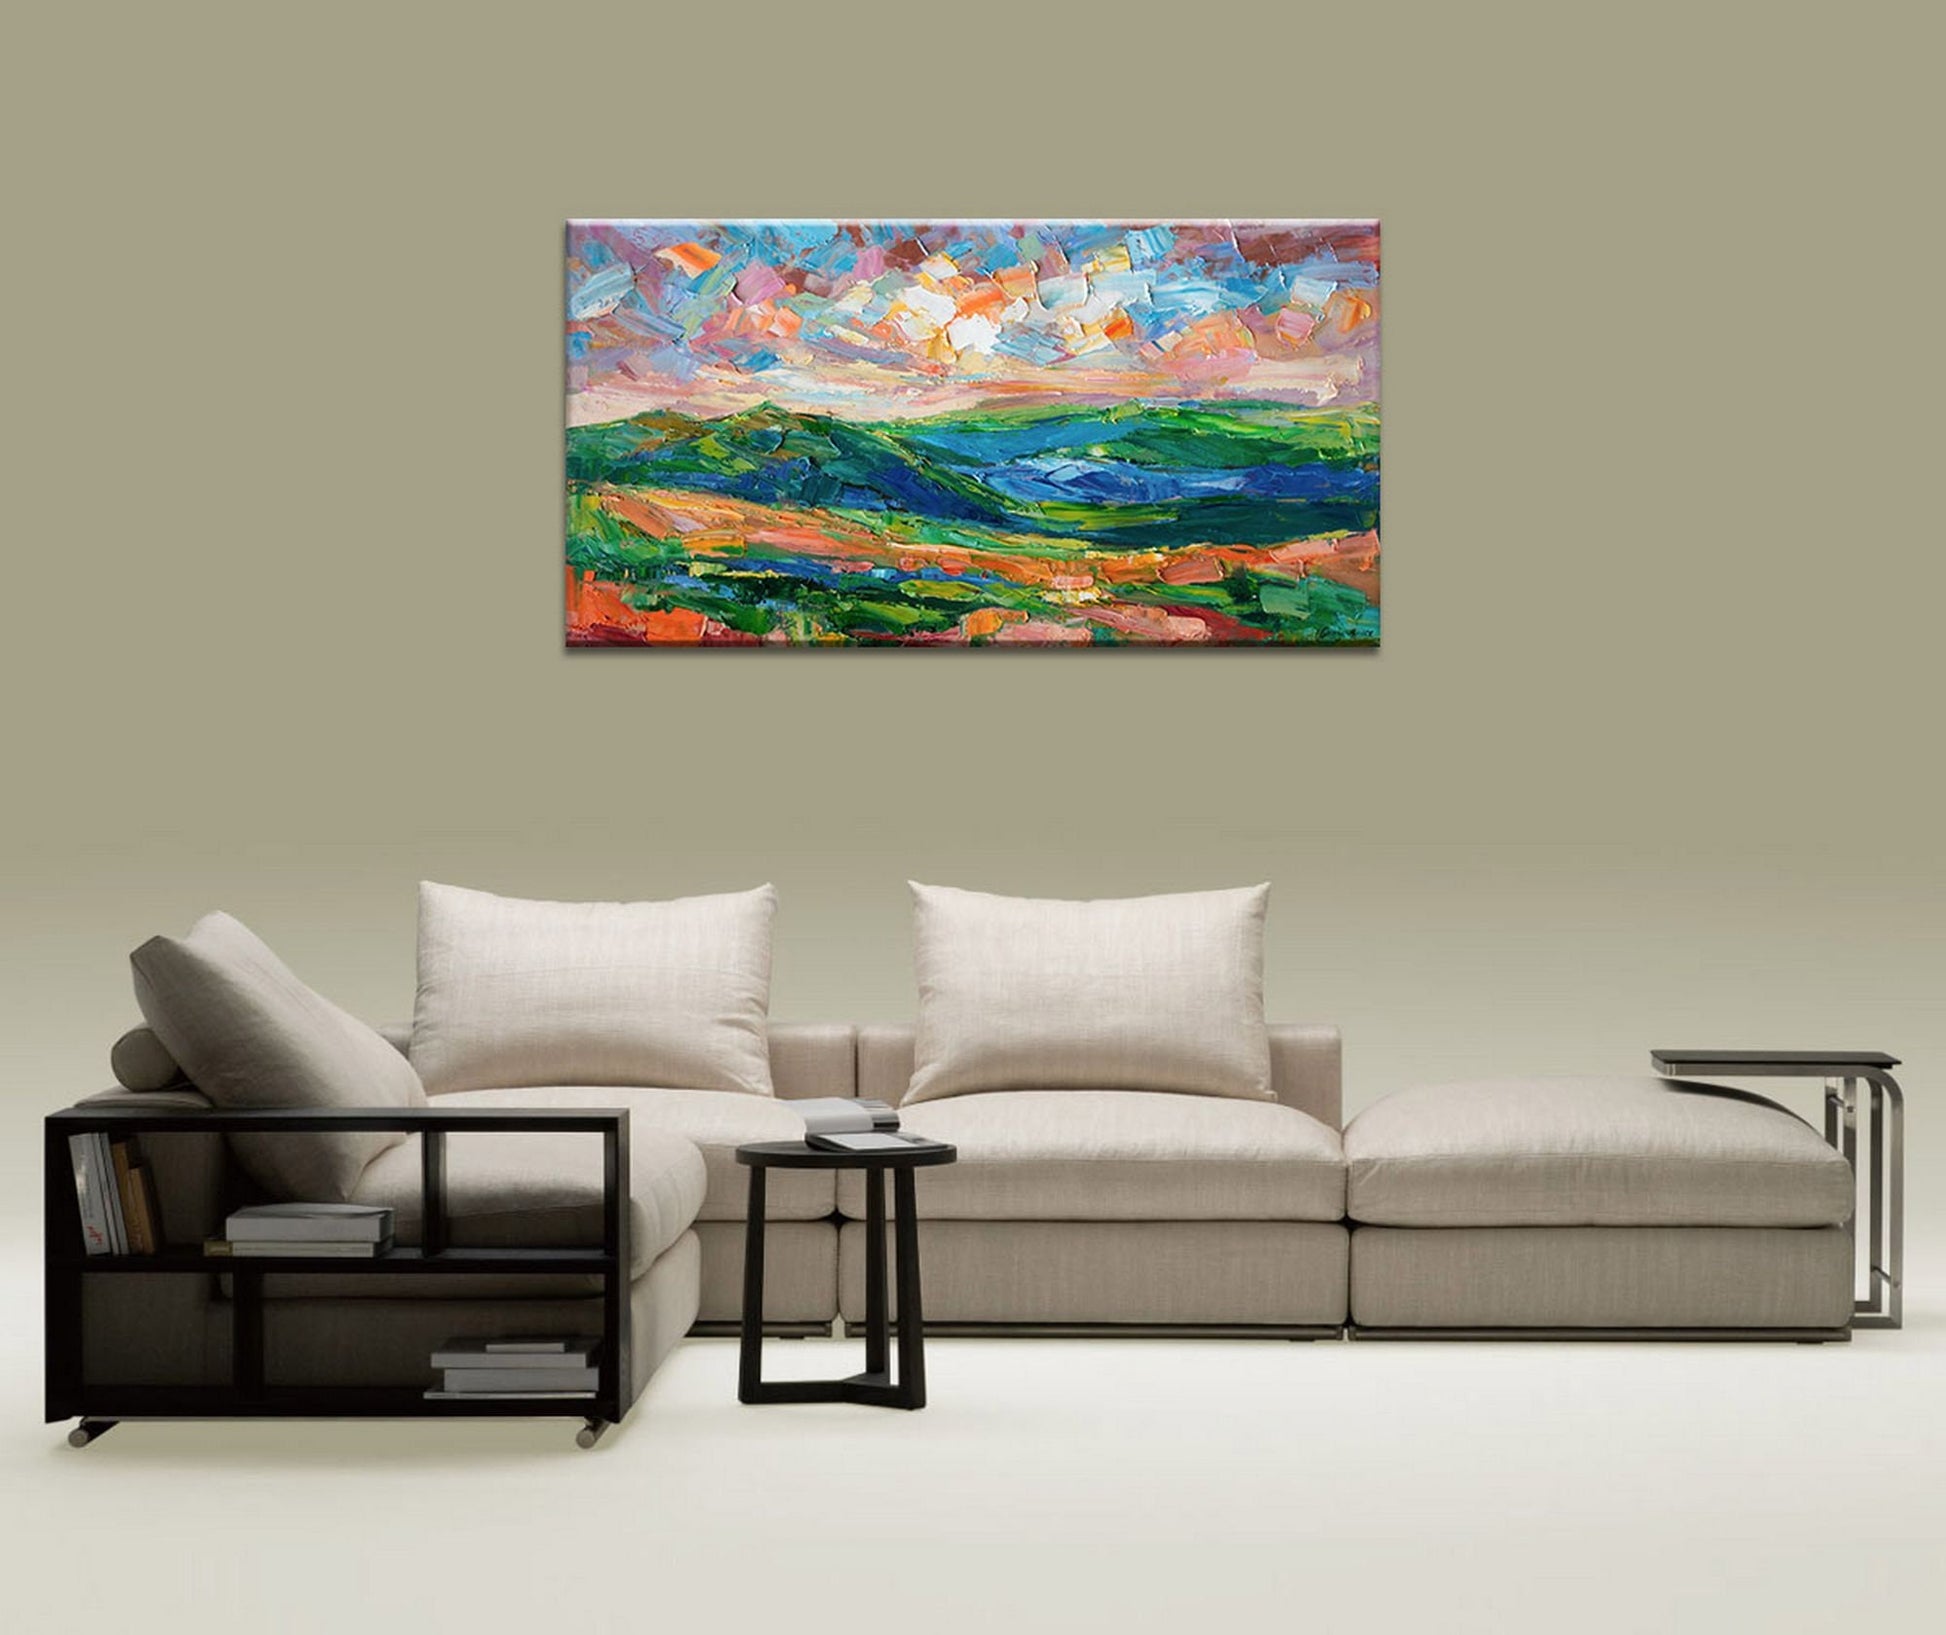 Abstract Oil Painting, Original Artwork, Abstract Canvas Painting, Contemporary, Large Abstract Painting, Oil Painting, Landscape Painting